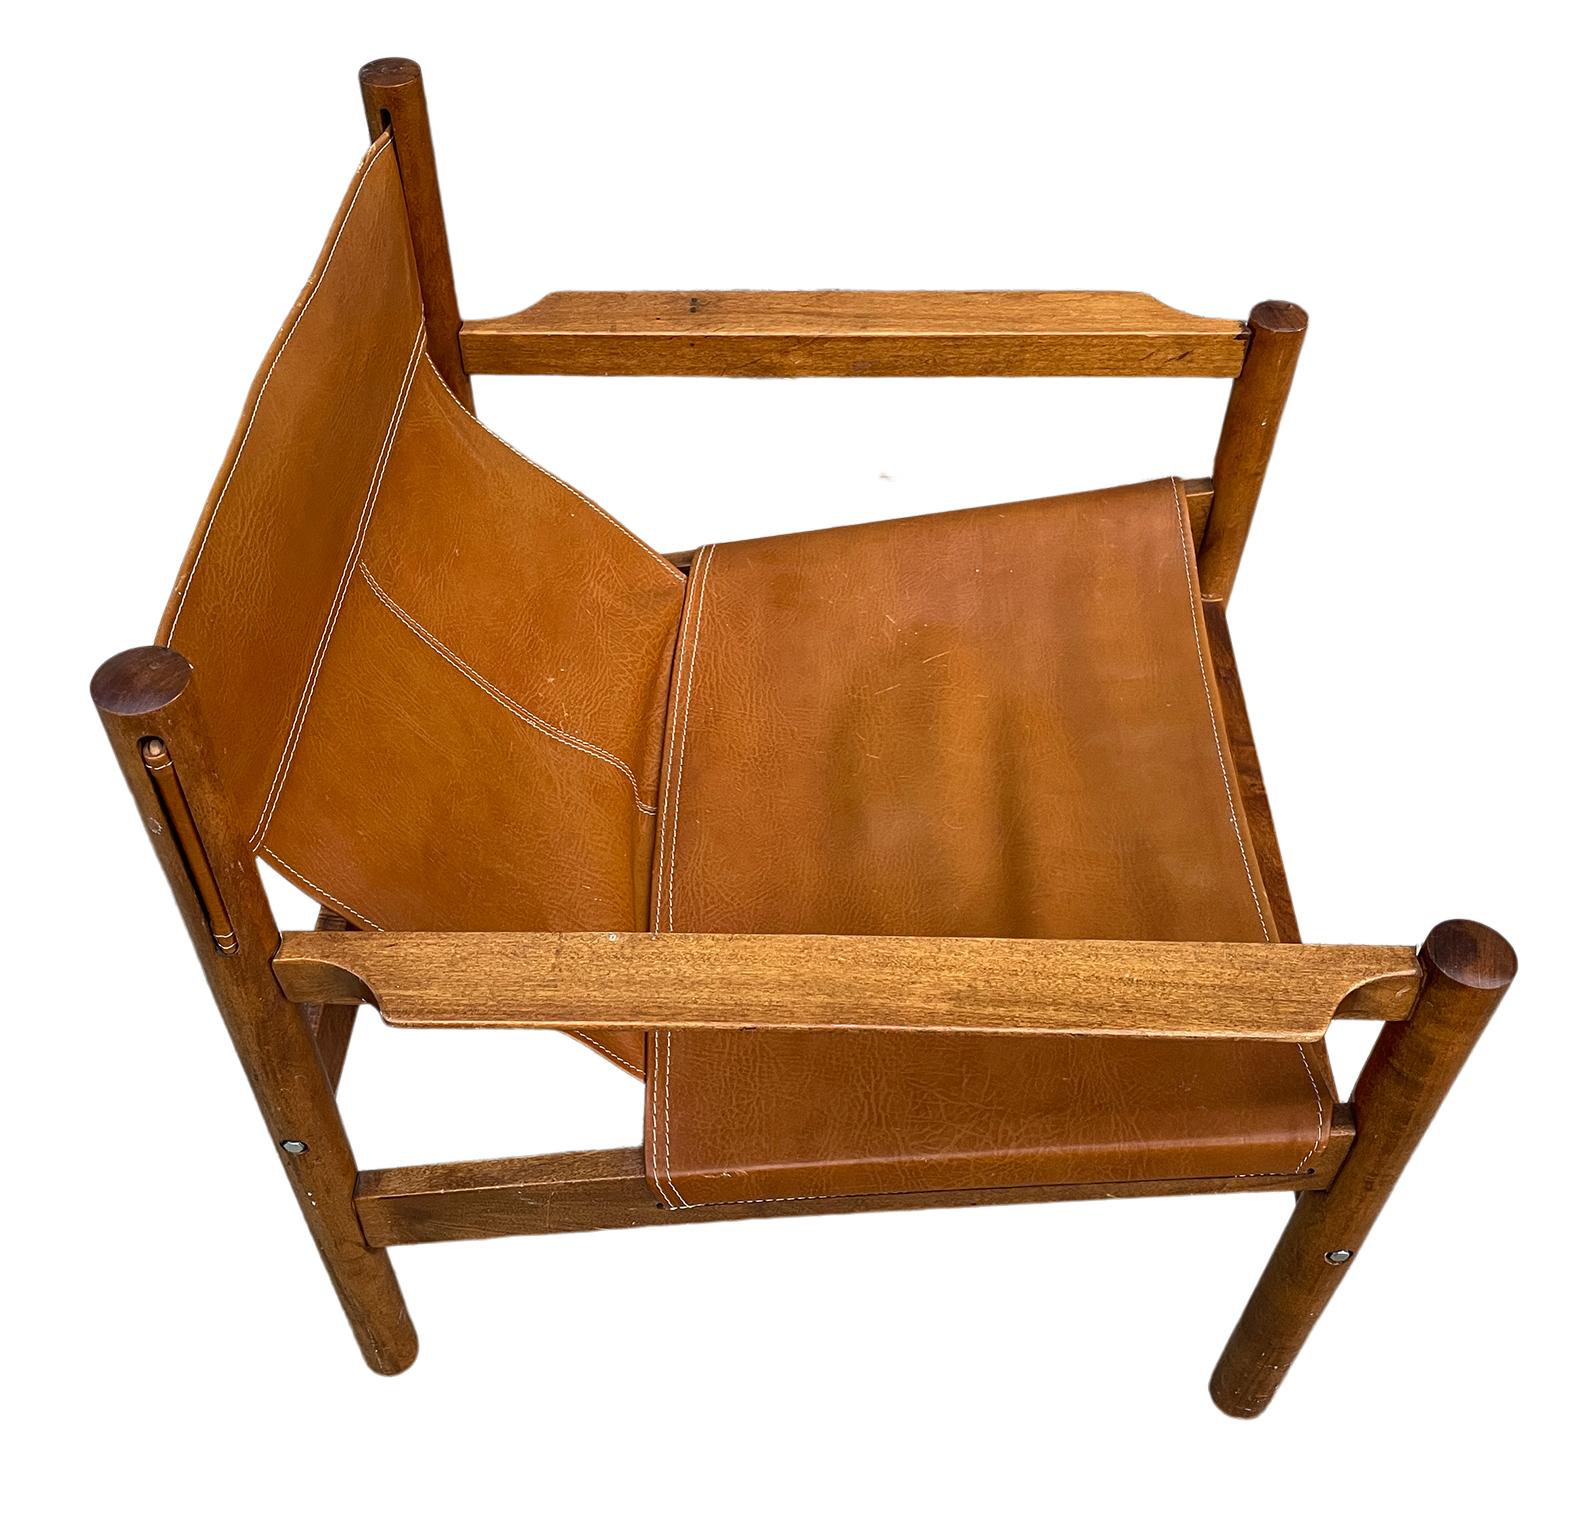 Mid-Century Modern Erik Worts brown oak leather sling safari lounge chair. Beautiful Tan leather with white stitching. beautiful design with solid light oak wood frame. Very iconic lounge chair.